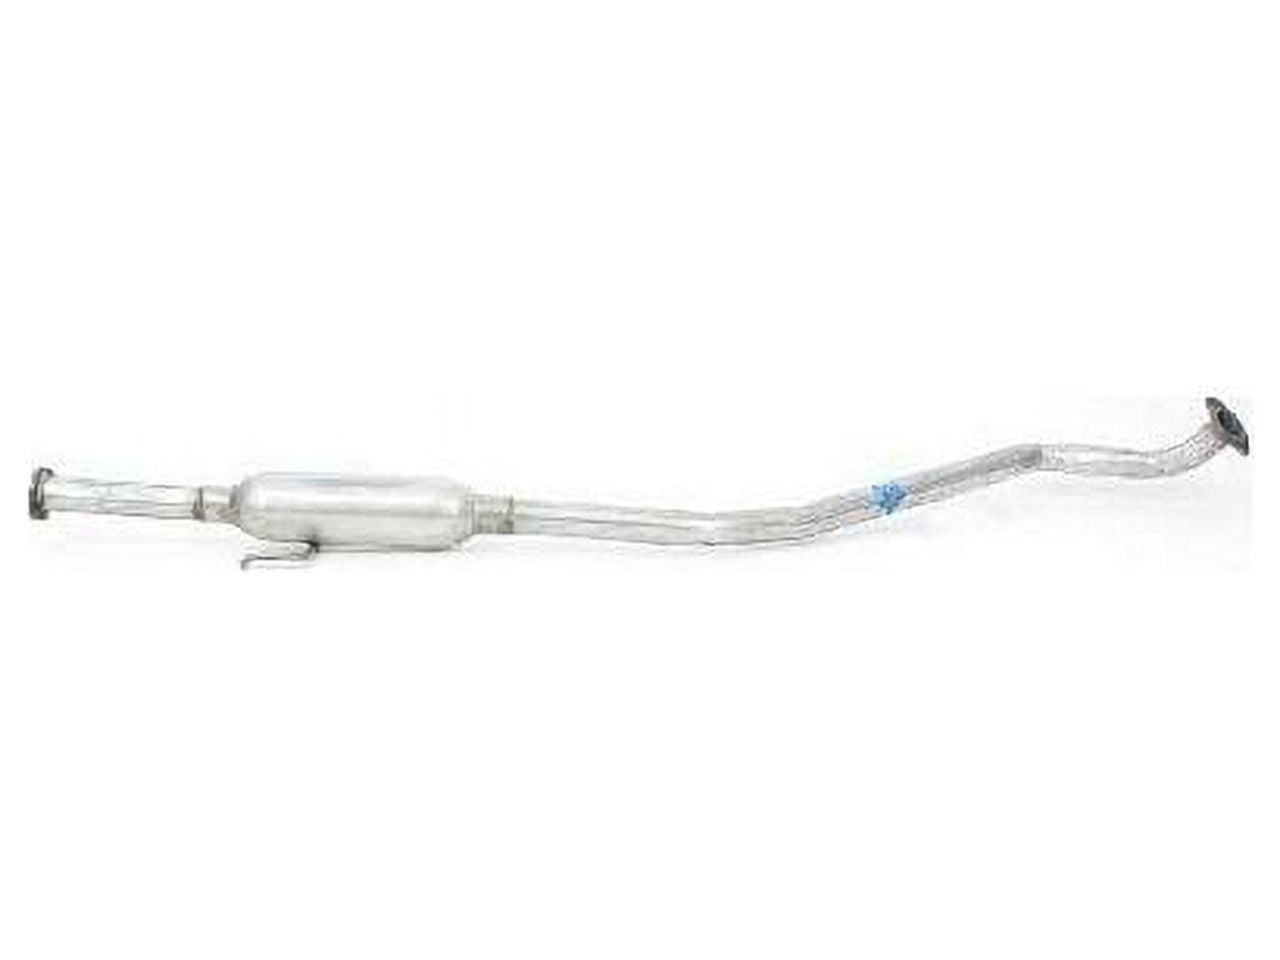 Exhaust Resonator and Line Assembly - Compatible with 2001 - 2006 Hyundai  Elantra 2.0L 4-Cylinder 2002 2003 2004 2005